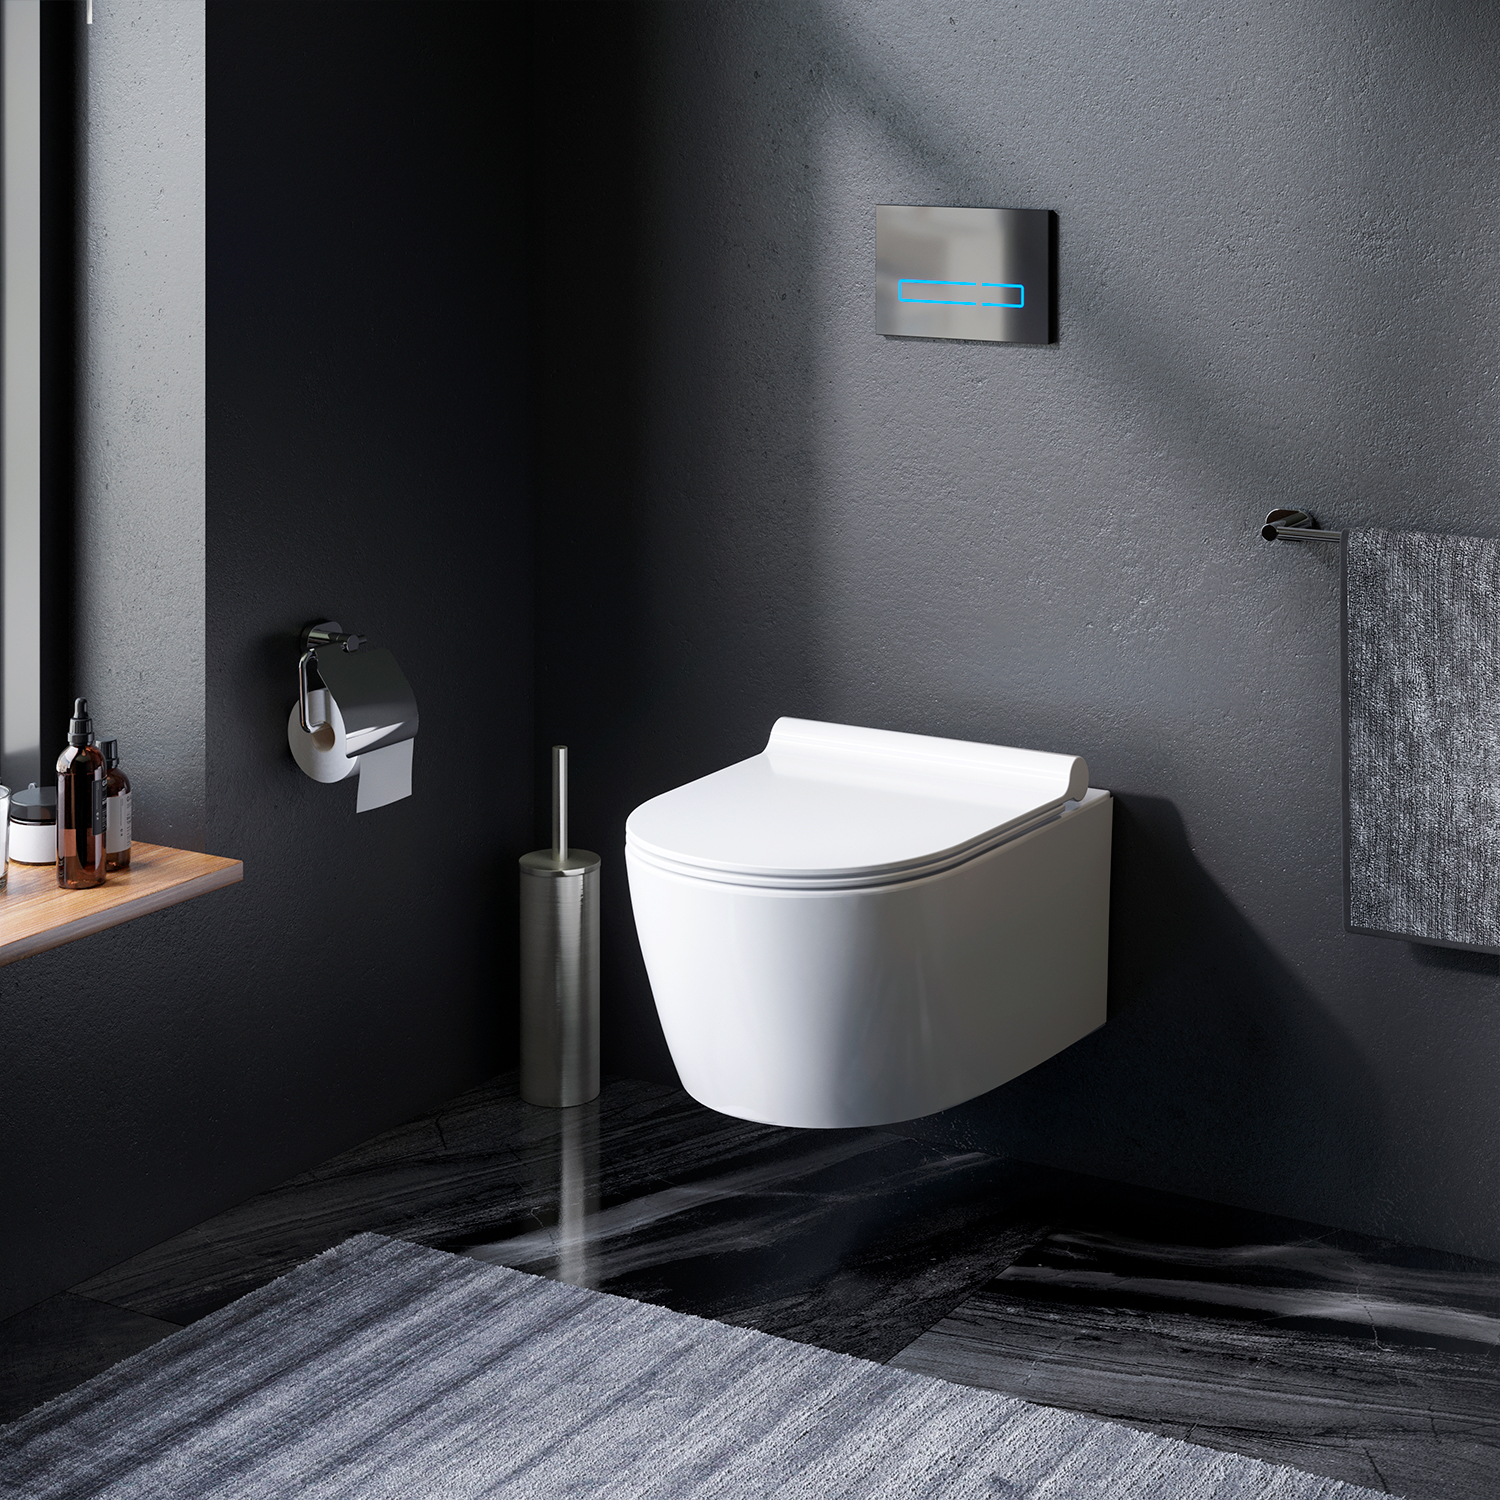 AM.PM X-Joy S FlashClean wall-mounted toilet with soft-closing seat cover